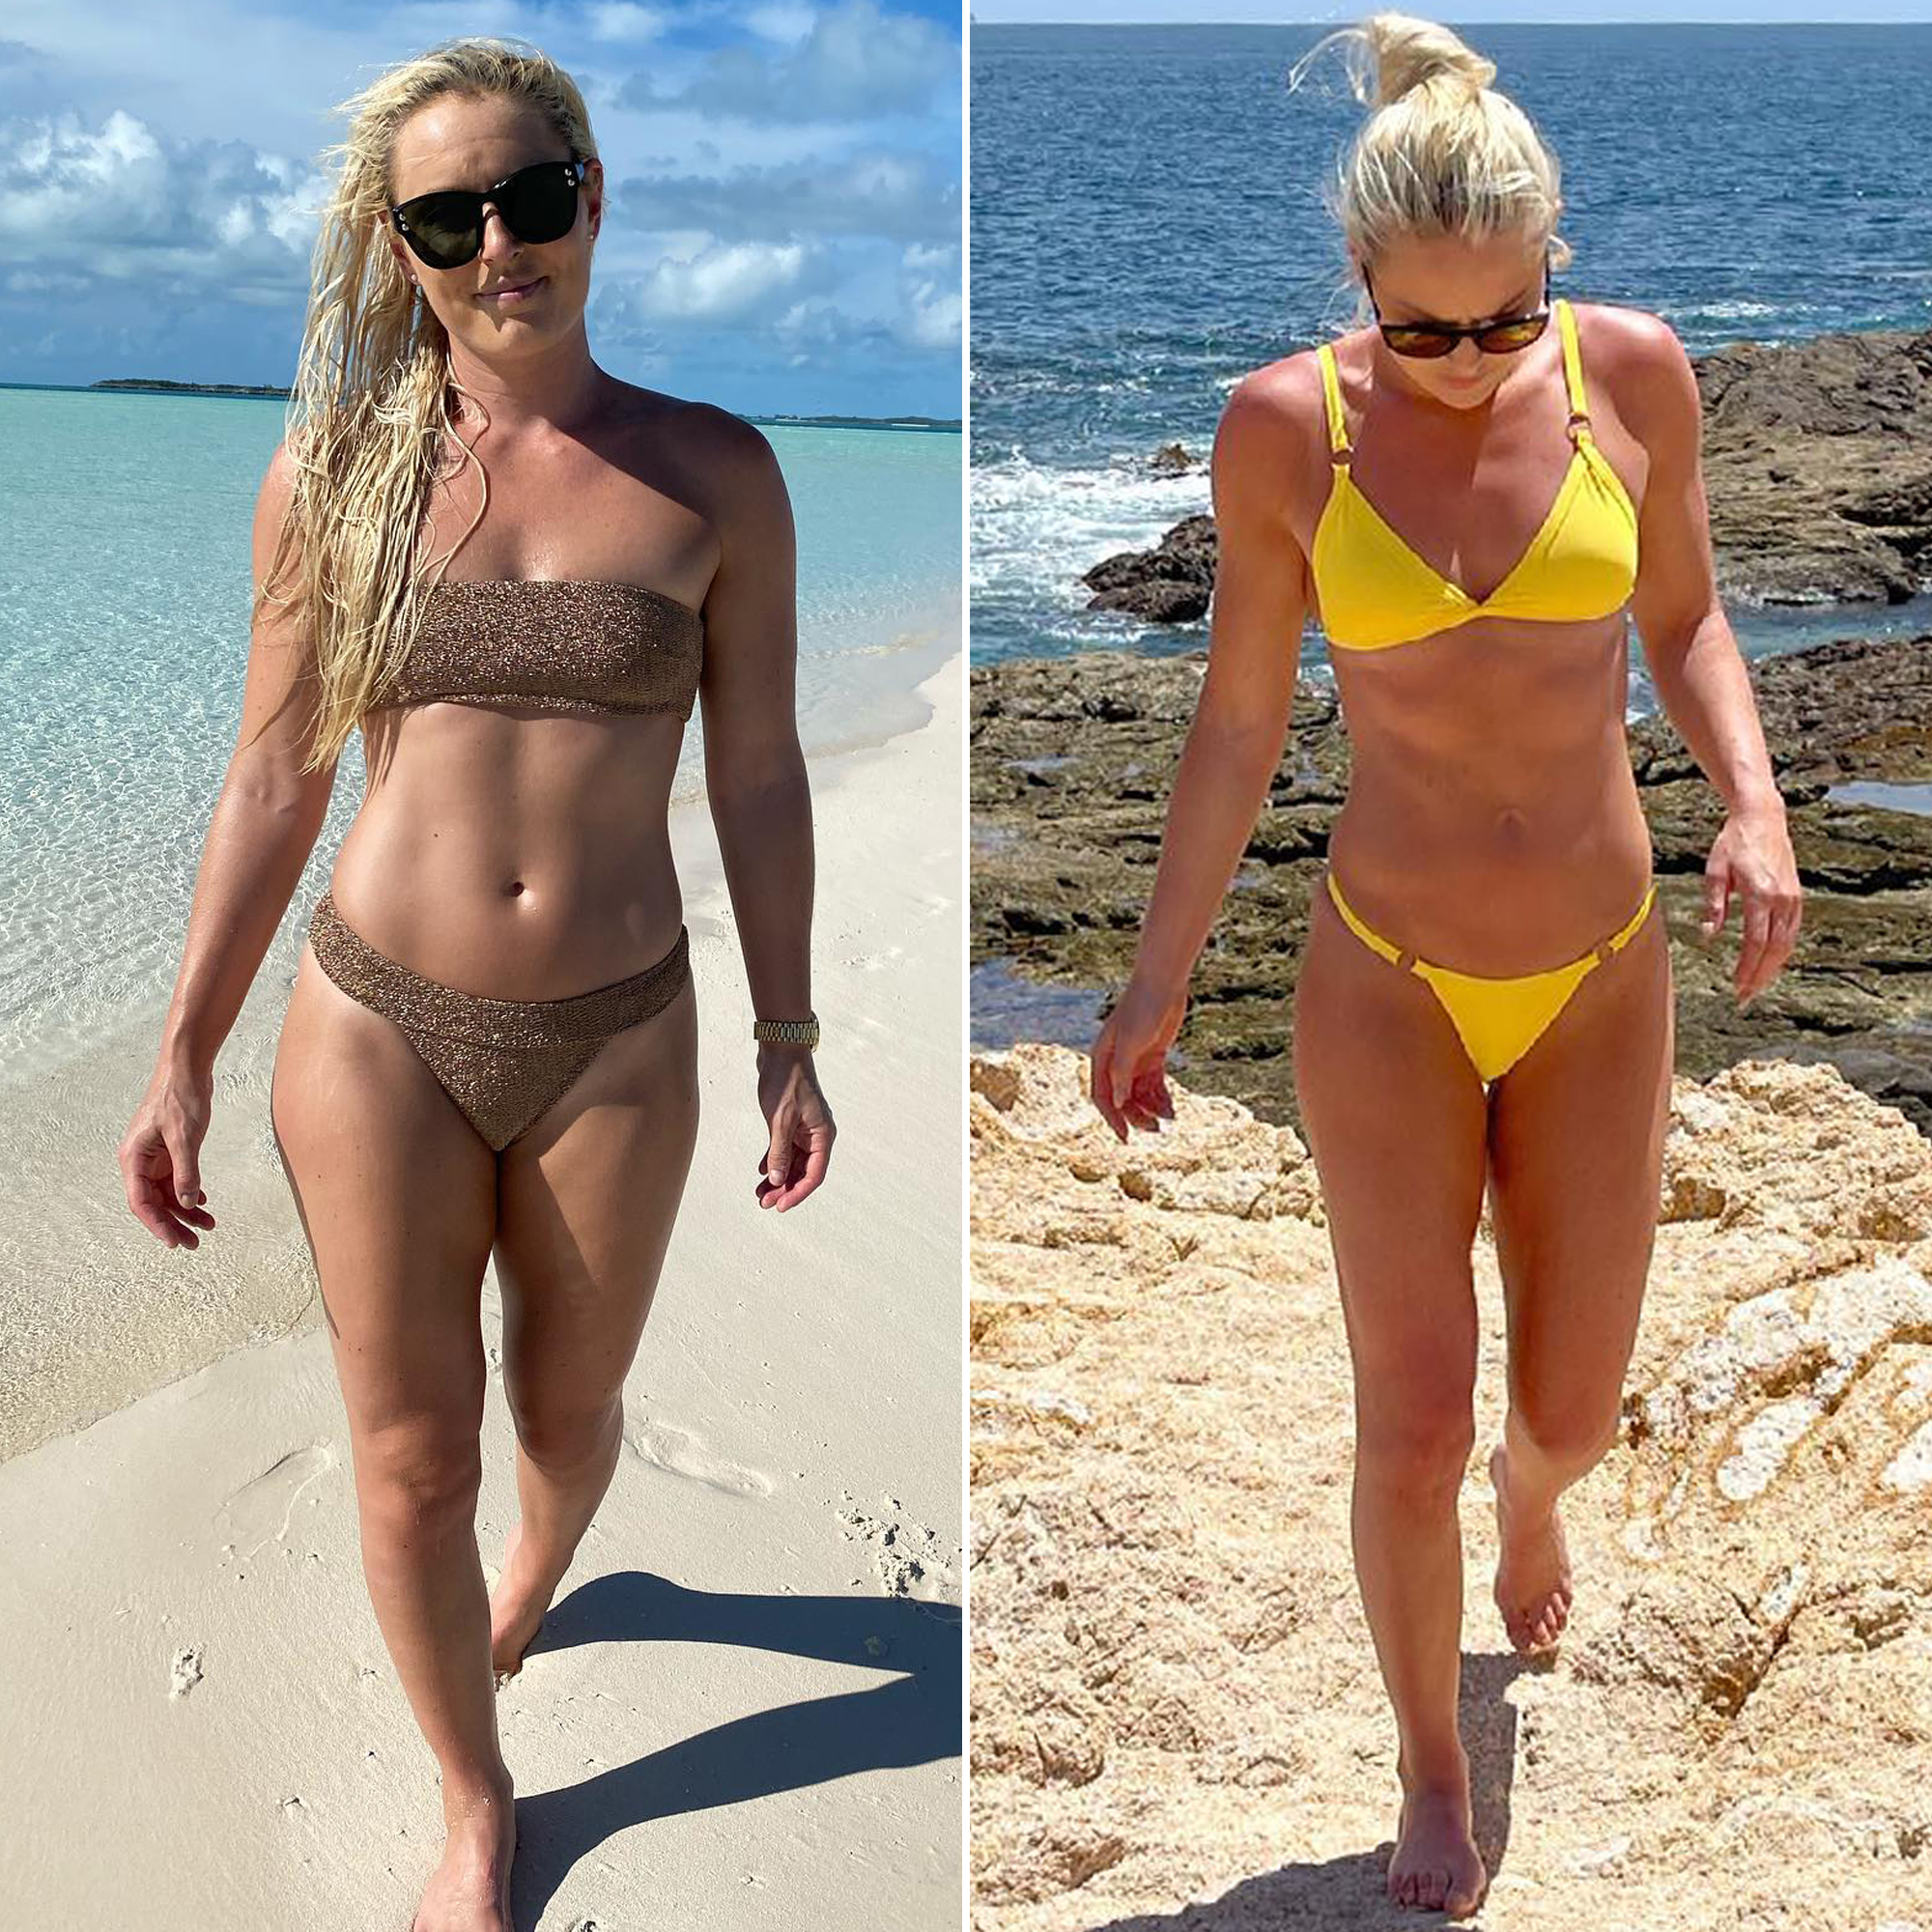 Big Tits Sex Nudist Beach - Lindsey Vonn's Bikini Photos: See Her Sexiest Swimsuit Pictures